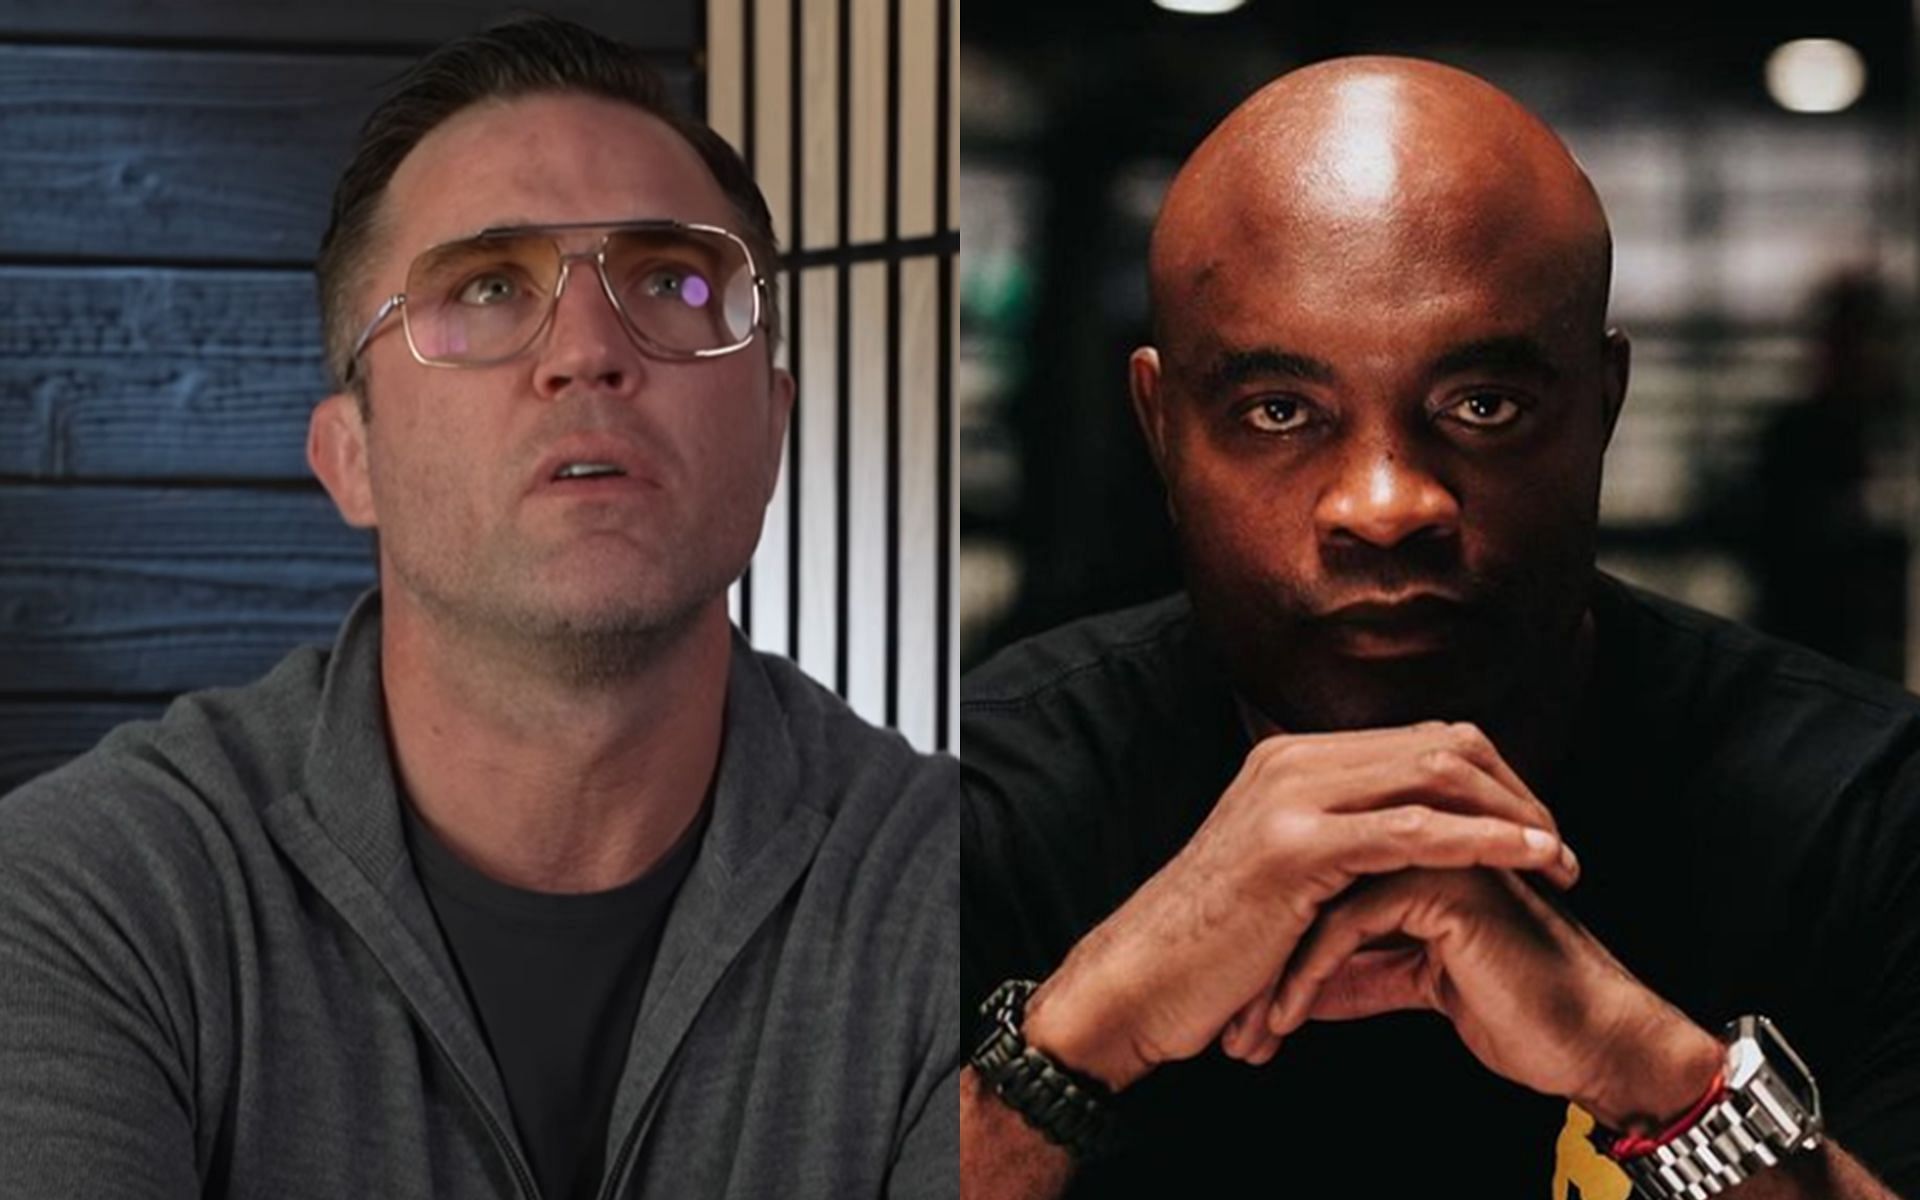 Chael Sonnen (left) gave Anderson Silva (right) one of the toughest fights of his career [Images Courtesy: @sonnench and @spiderandersonsilva Instagram]